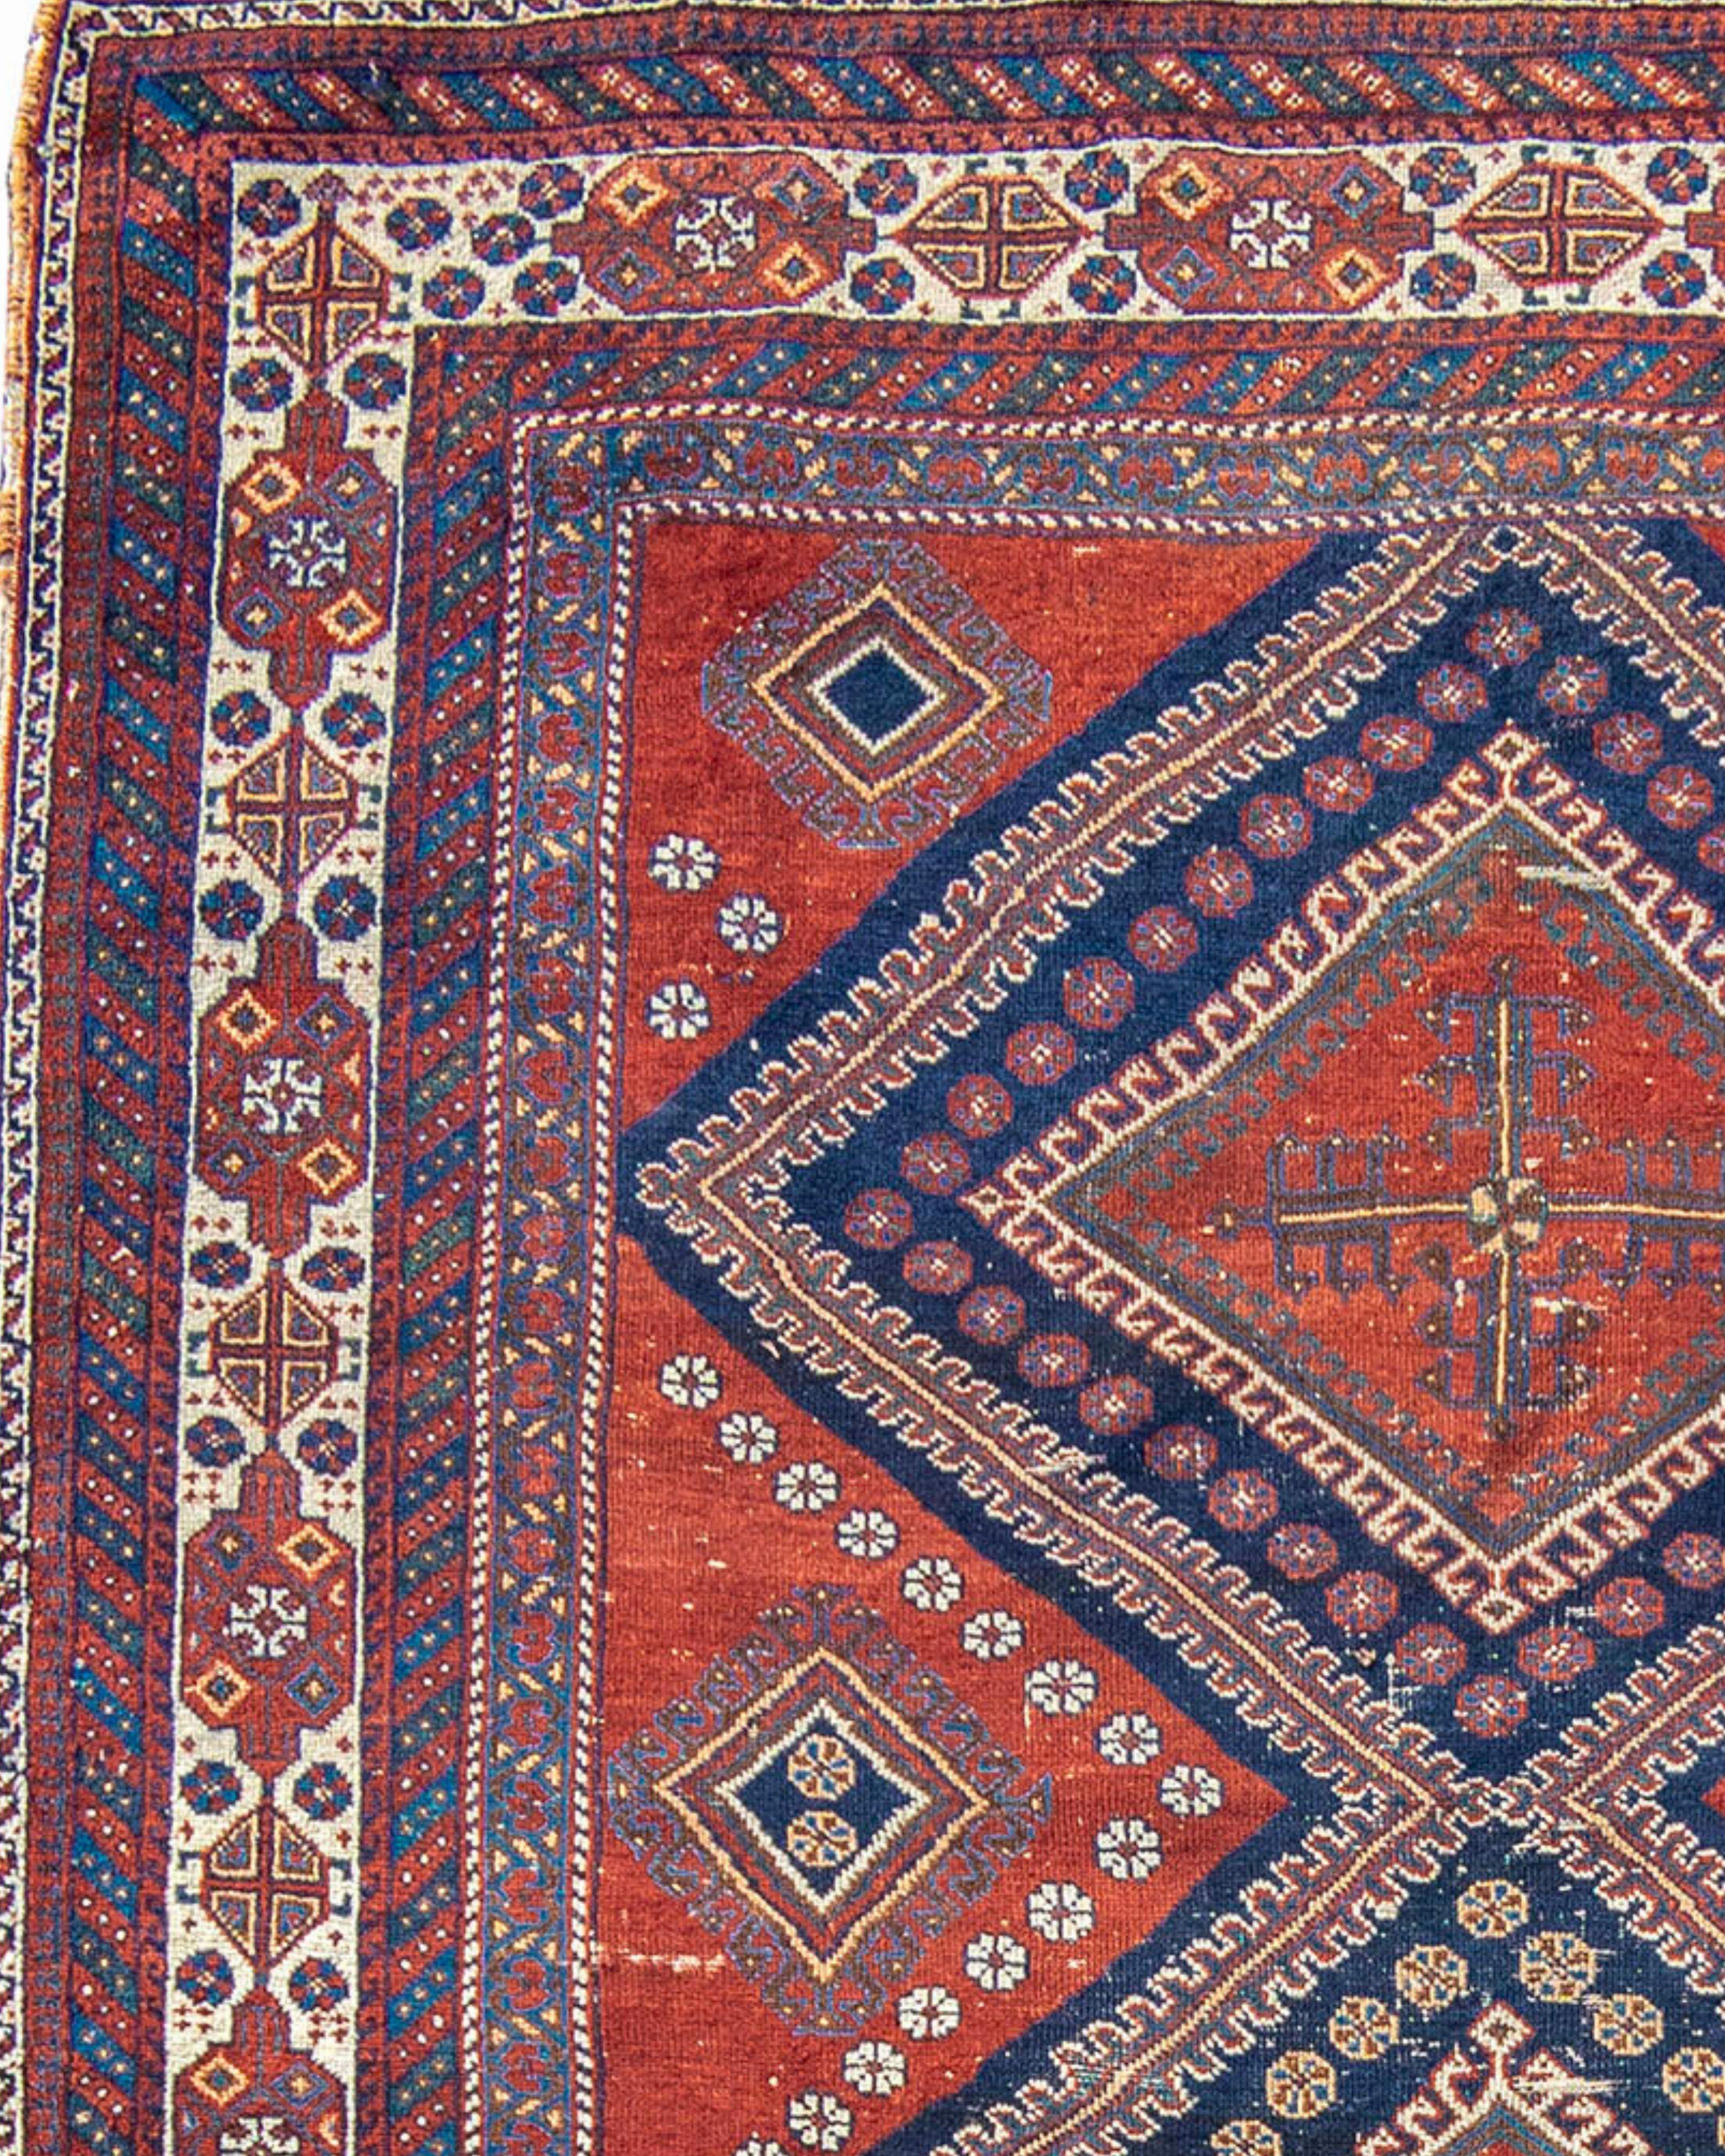 Hand-Woven Antique Persian Afshar Rug, c. 1900 For Sale